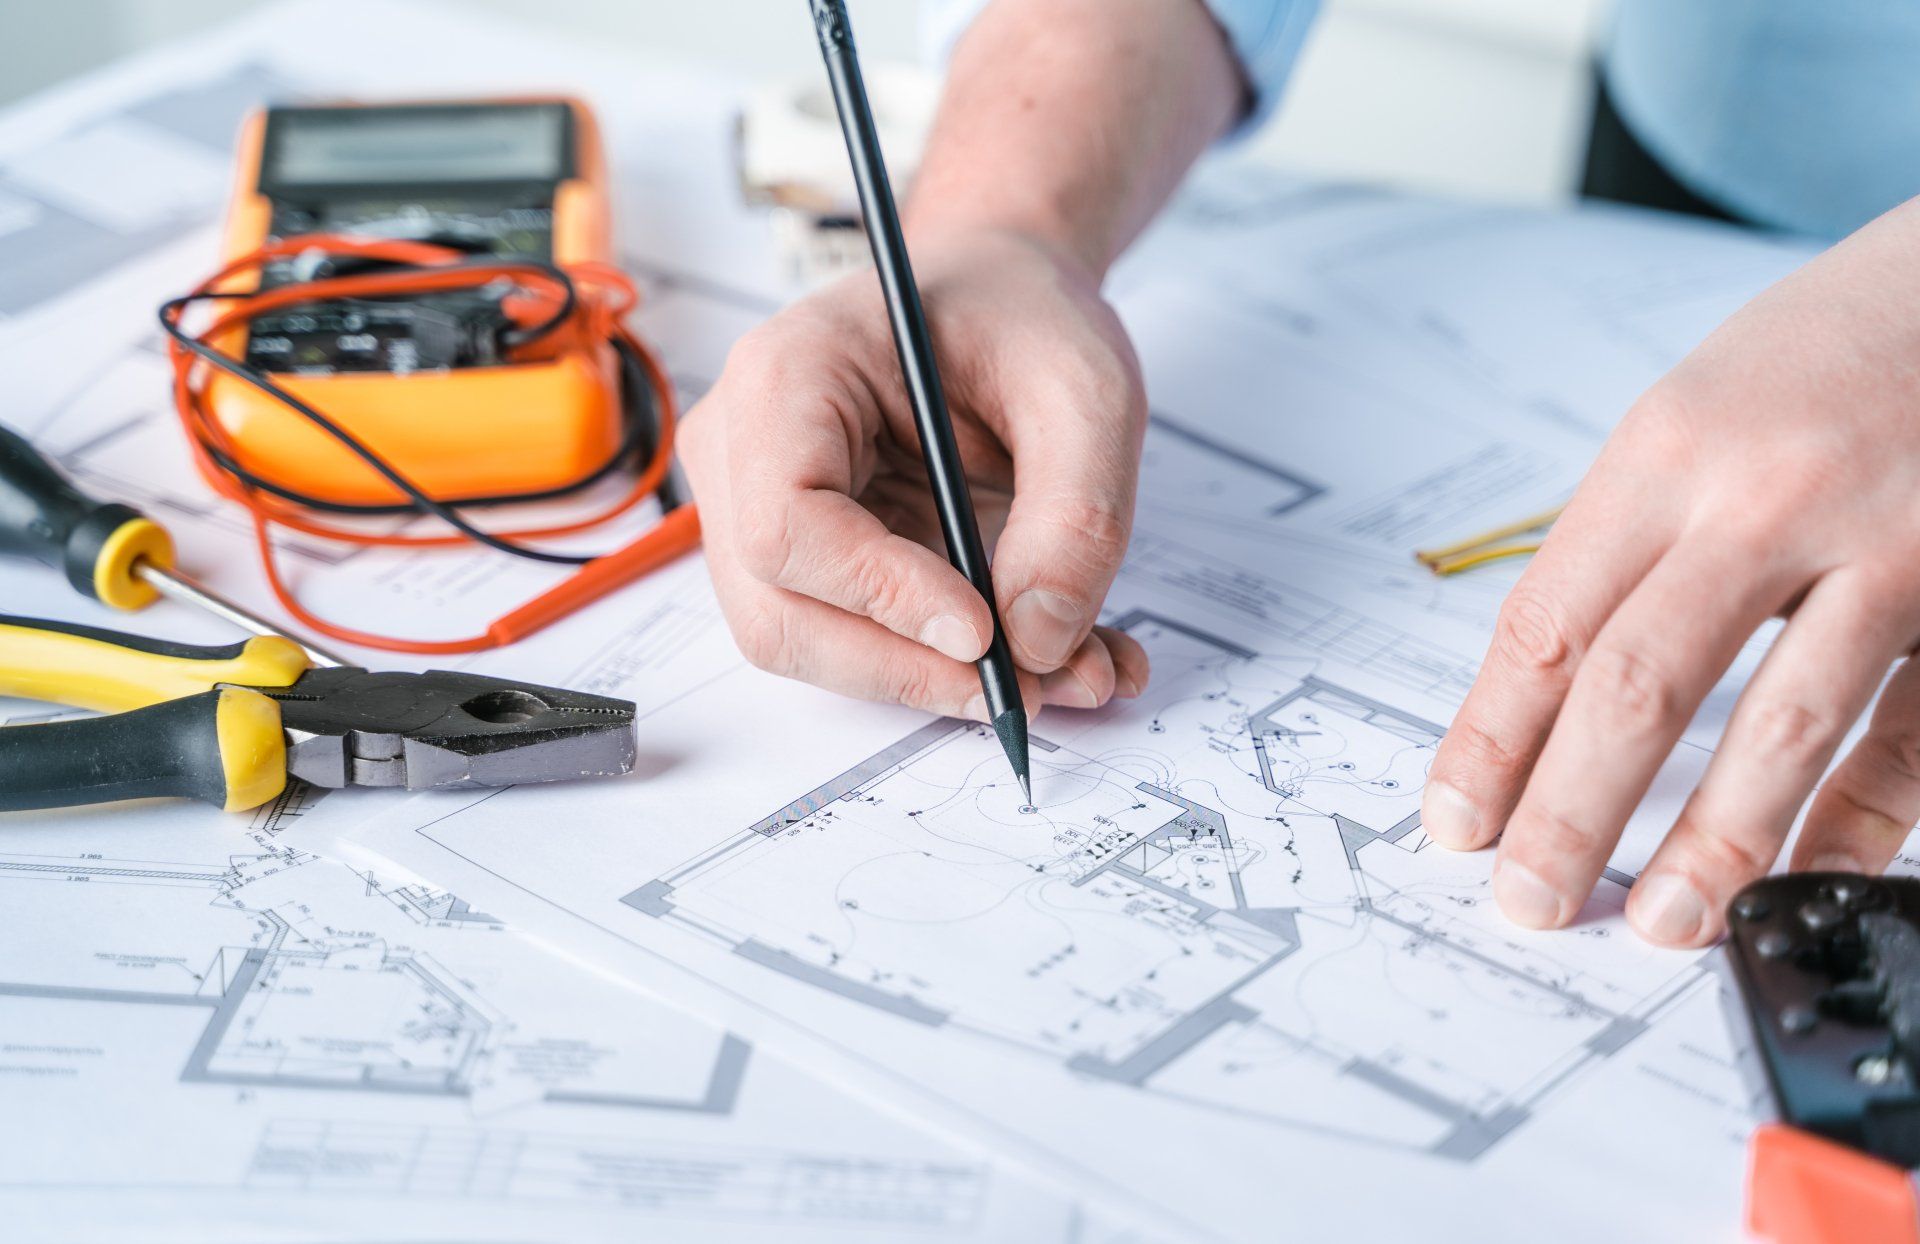 License electrician creating an electrical blueprint